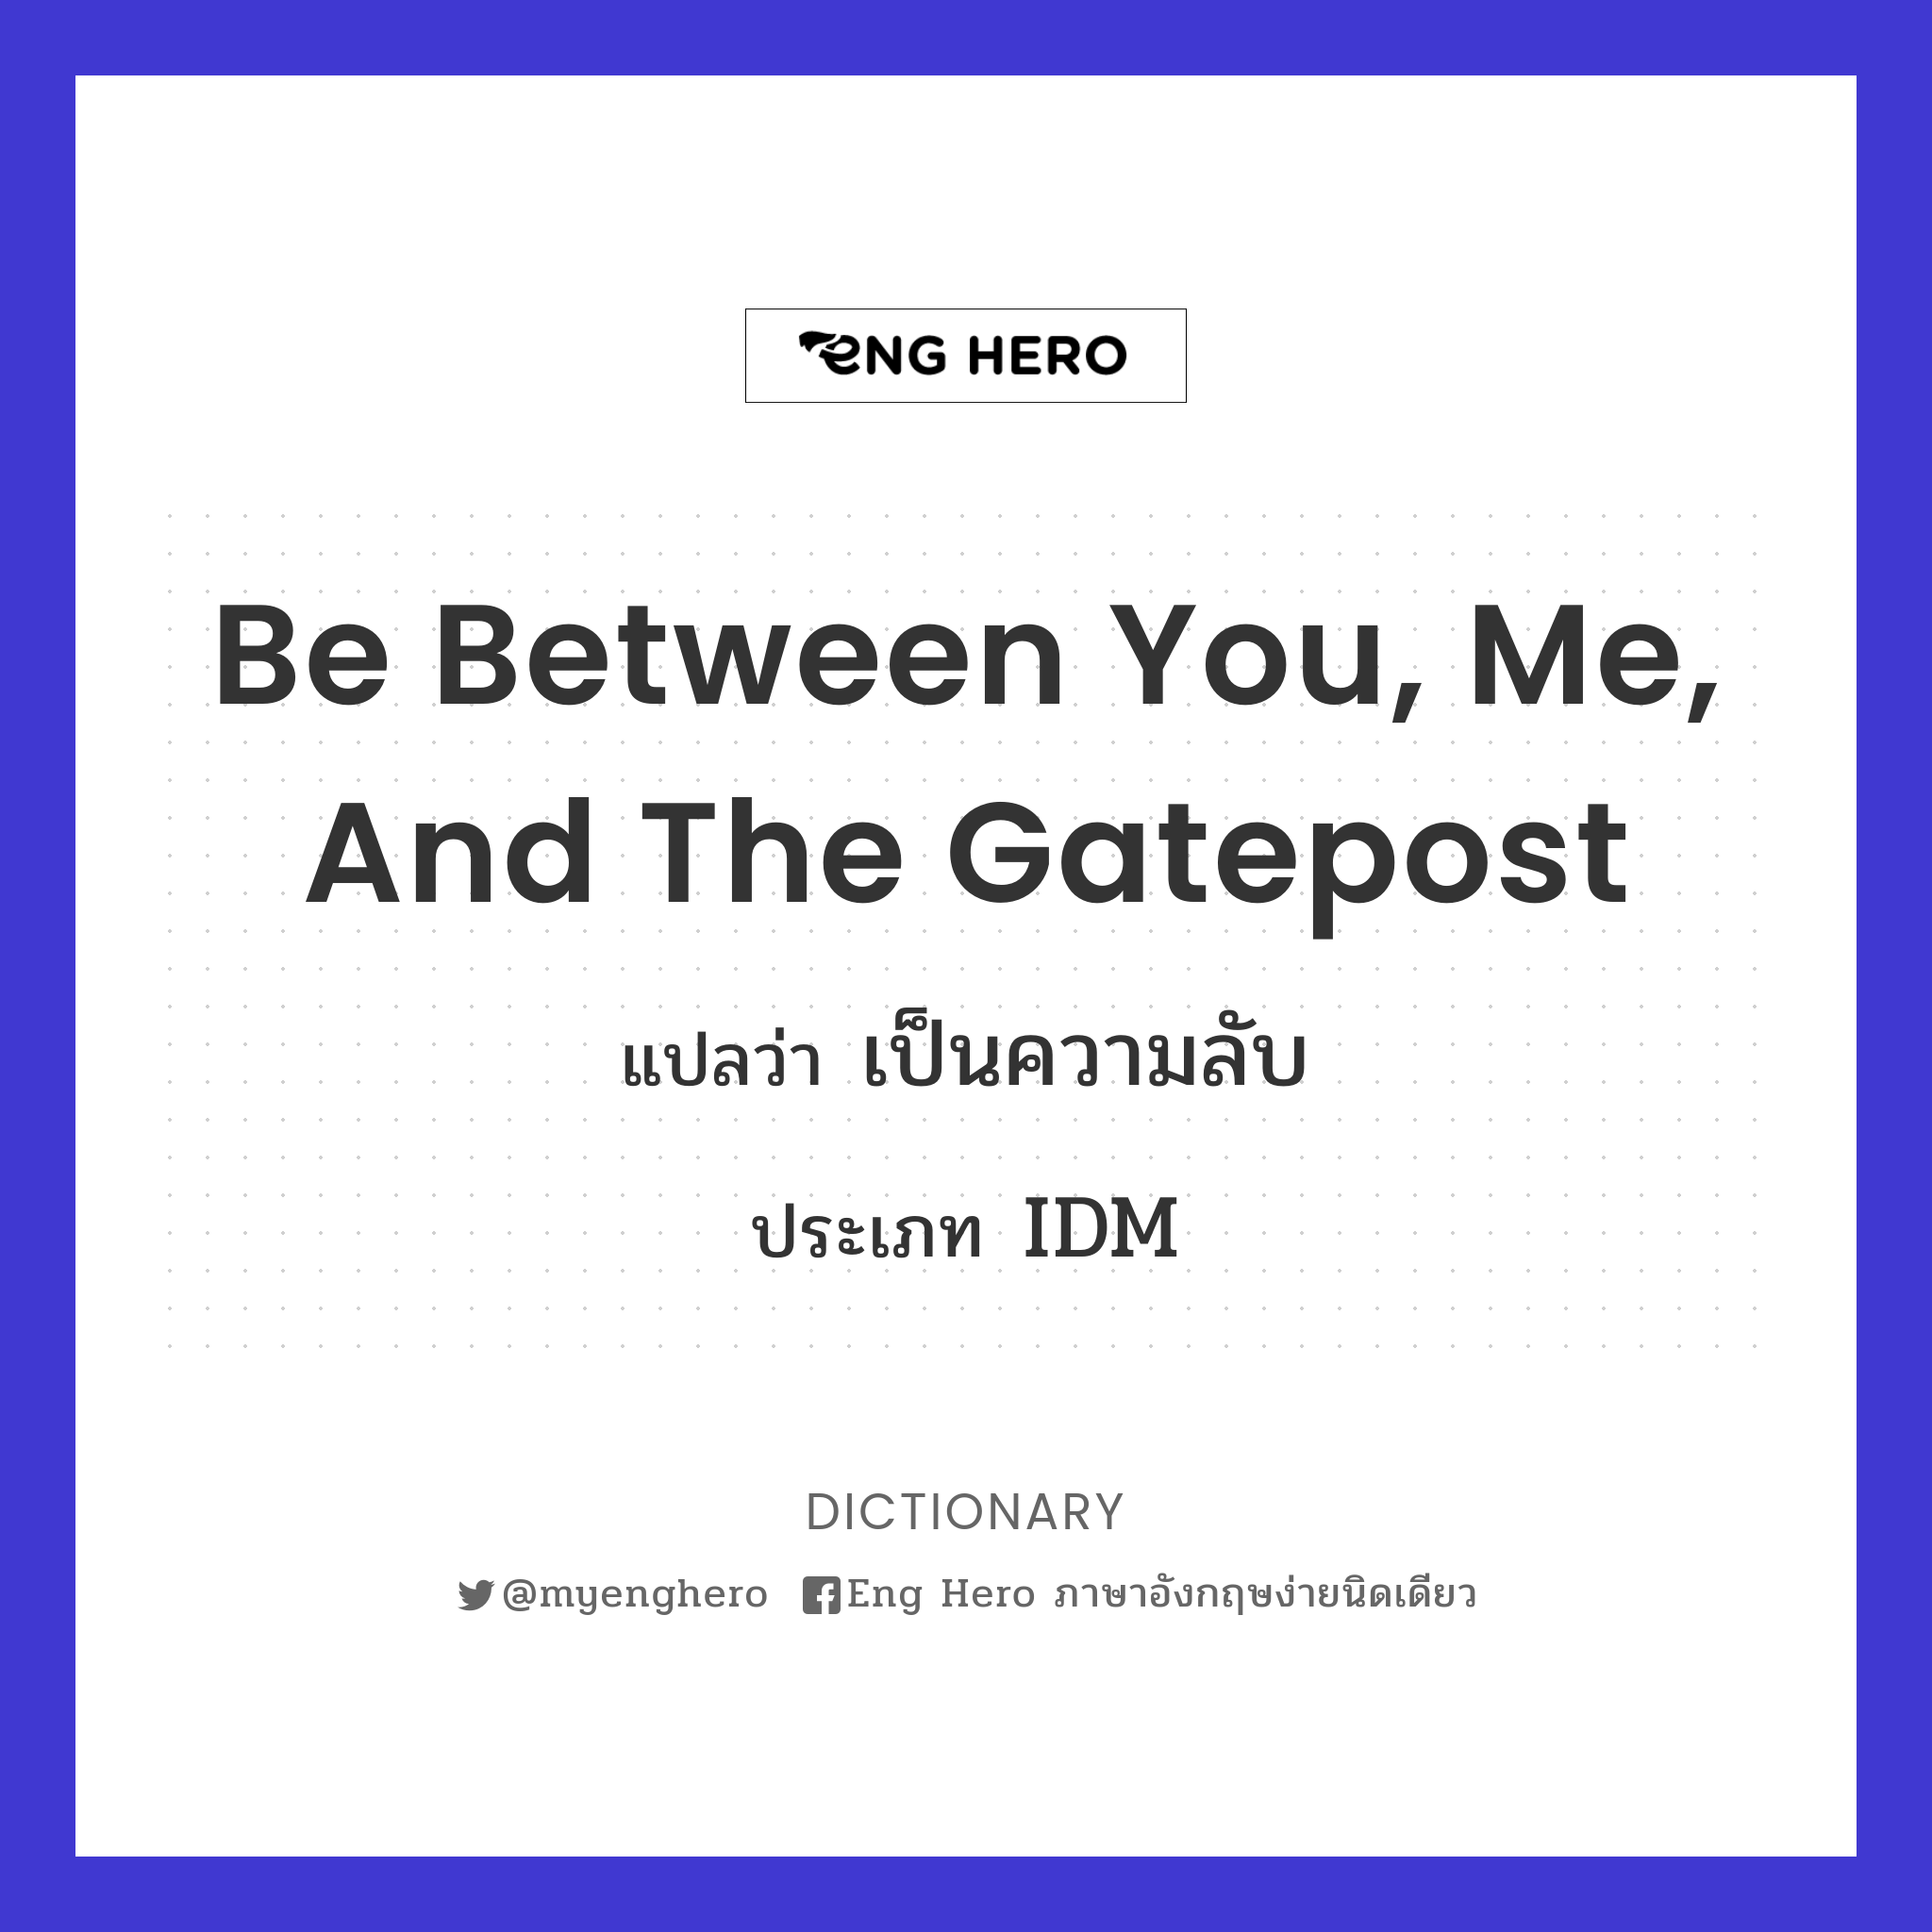 be between you, me, and the gatepost